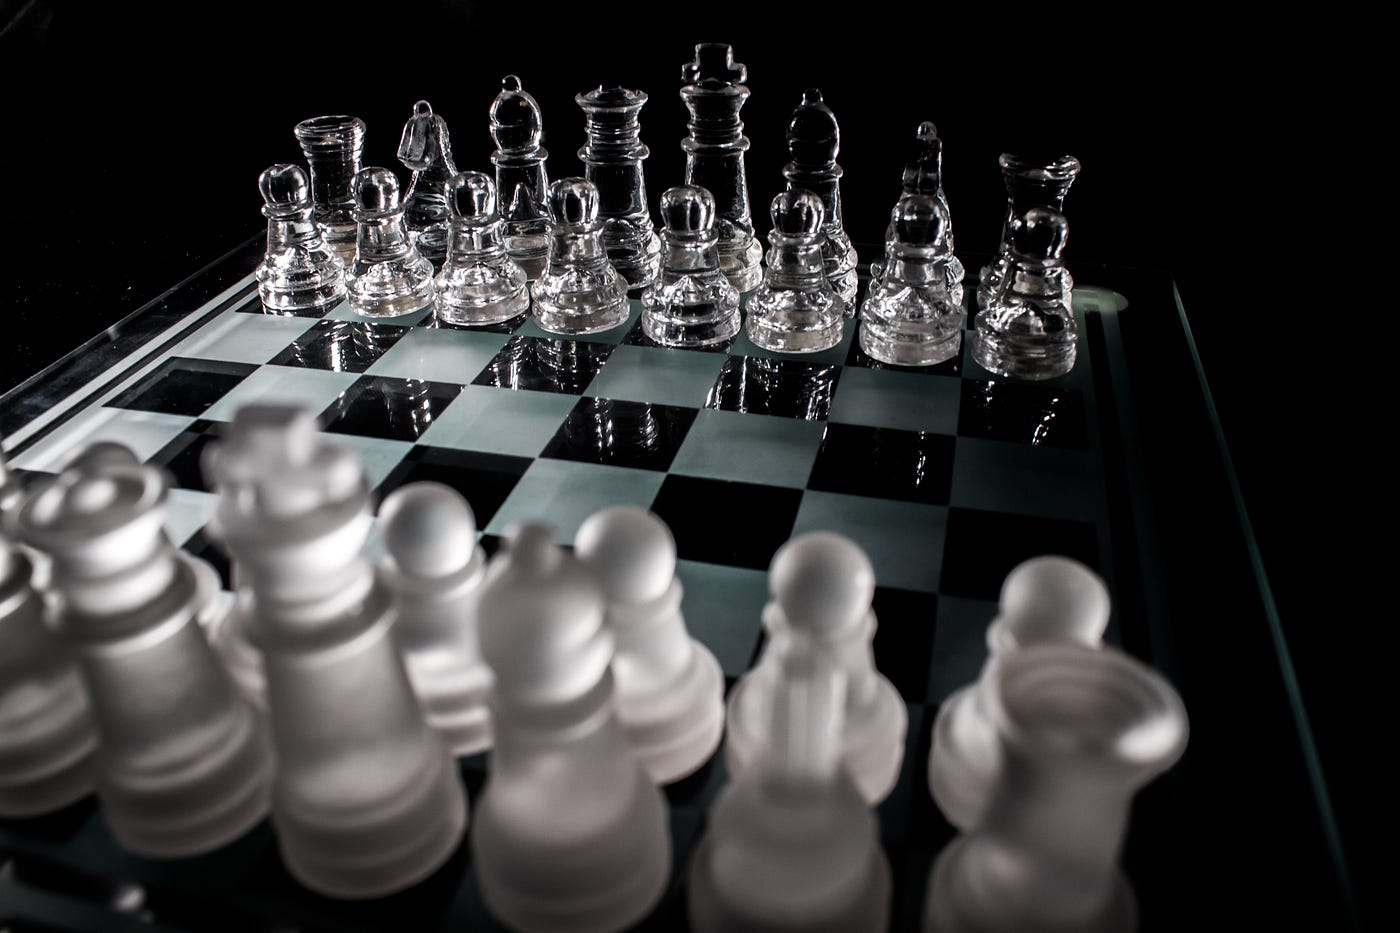 What is considered an average chess rating? - Quora